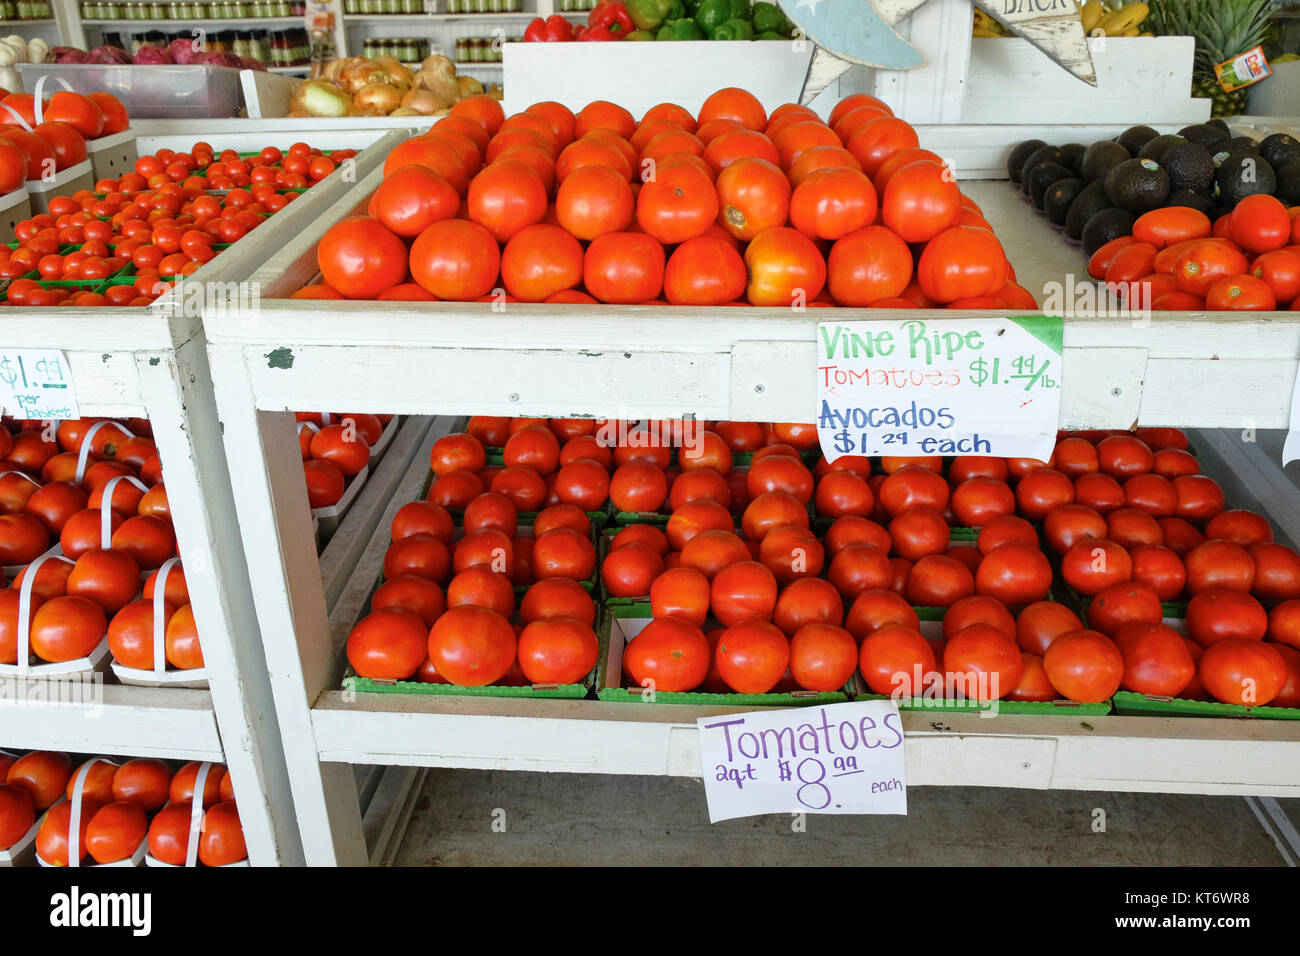 Farmer's market or produce market or stand with beefsteak, roma and cherry tomatoes for sale along with avocados and other fruits and vegetables. Stock Photo